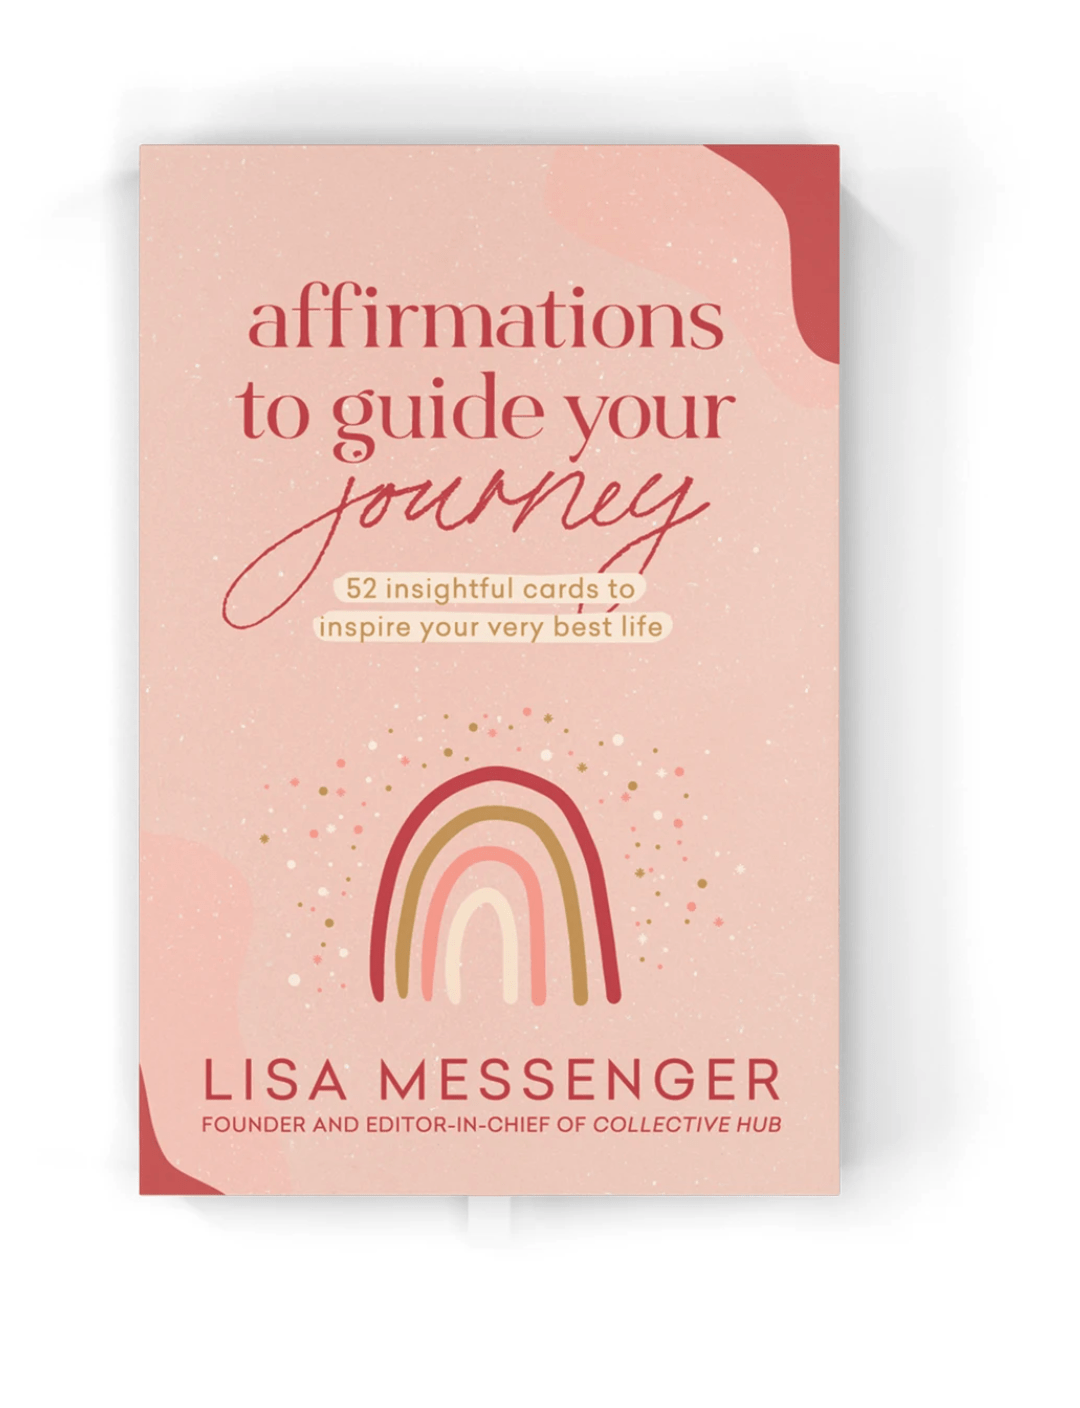 Affirmations to Guide Your Journey - Box Card Set by Collective Hub.